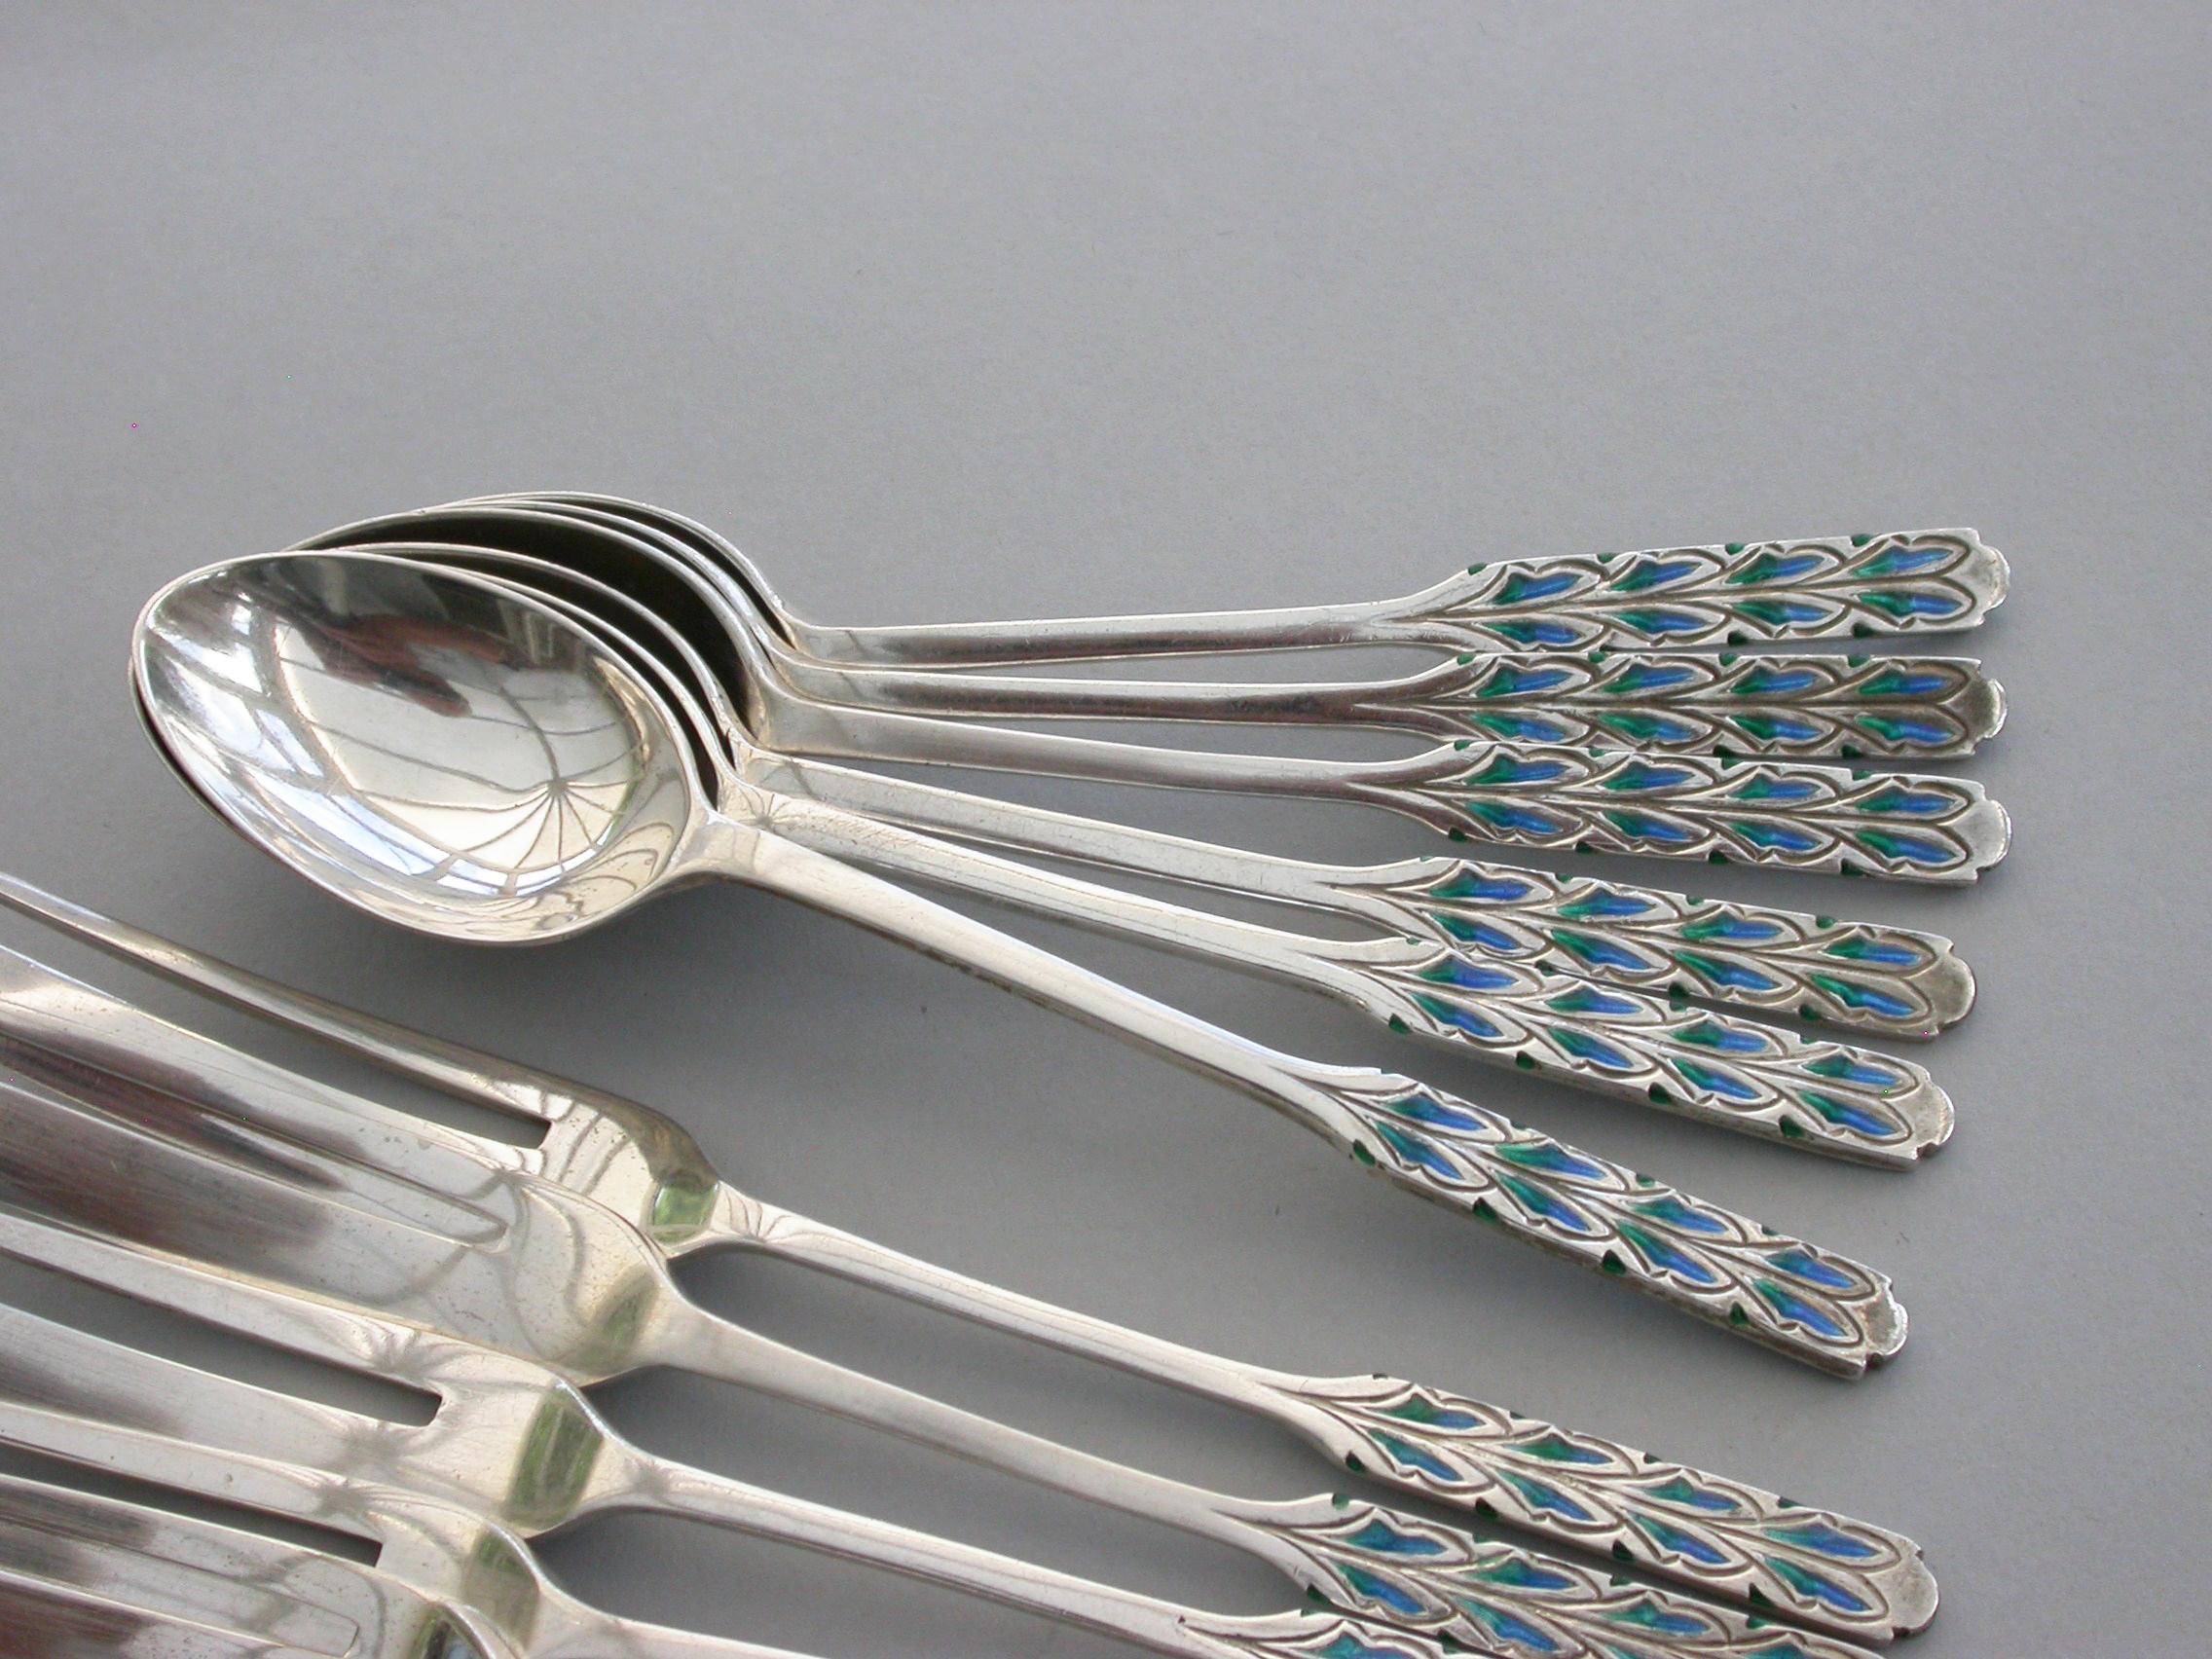 Cased Set 12 Silver and Enamel Pastry Spoons & Forks by Liberty & Co, 1927-1928 For Sale 5